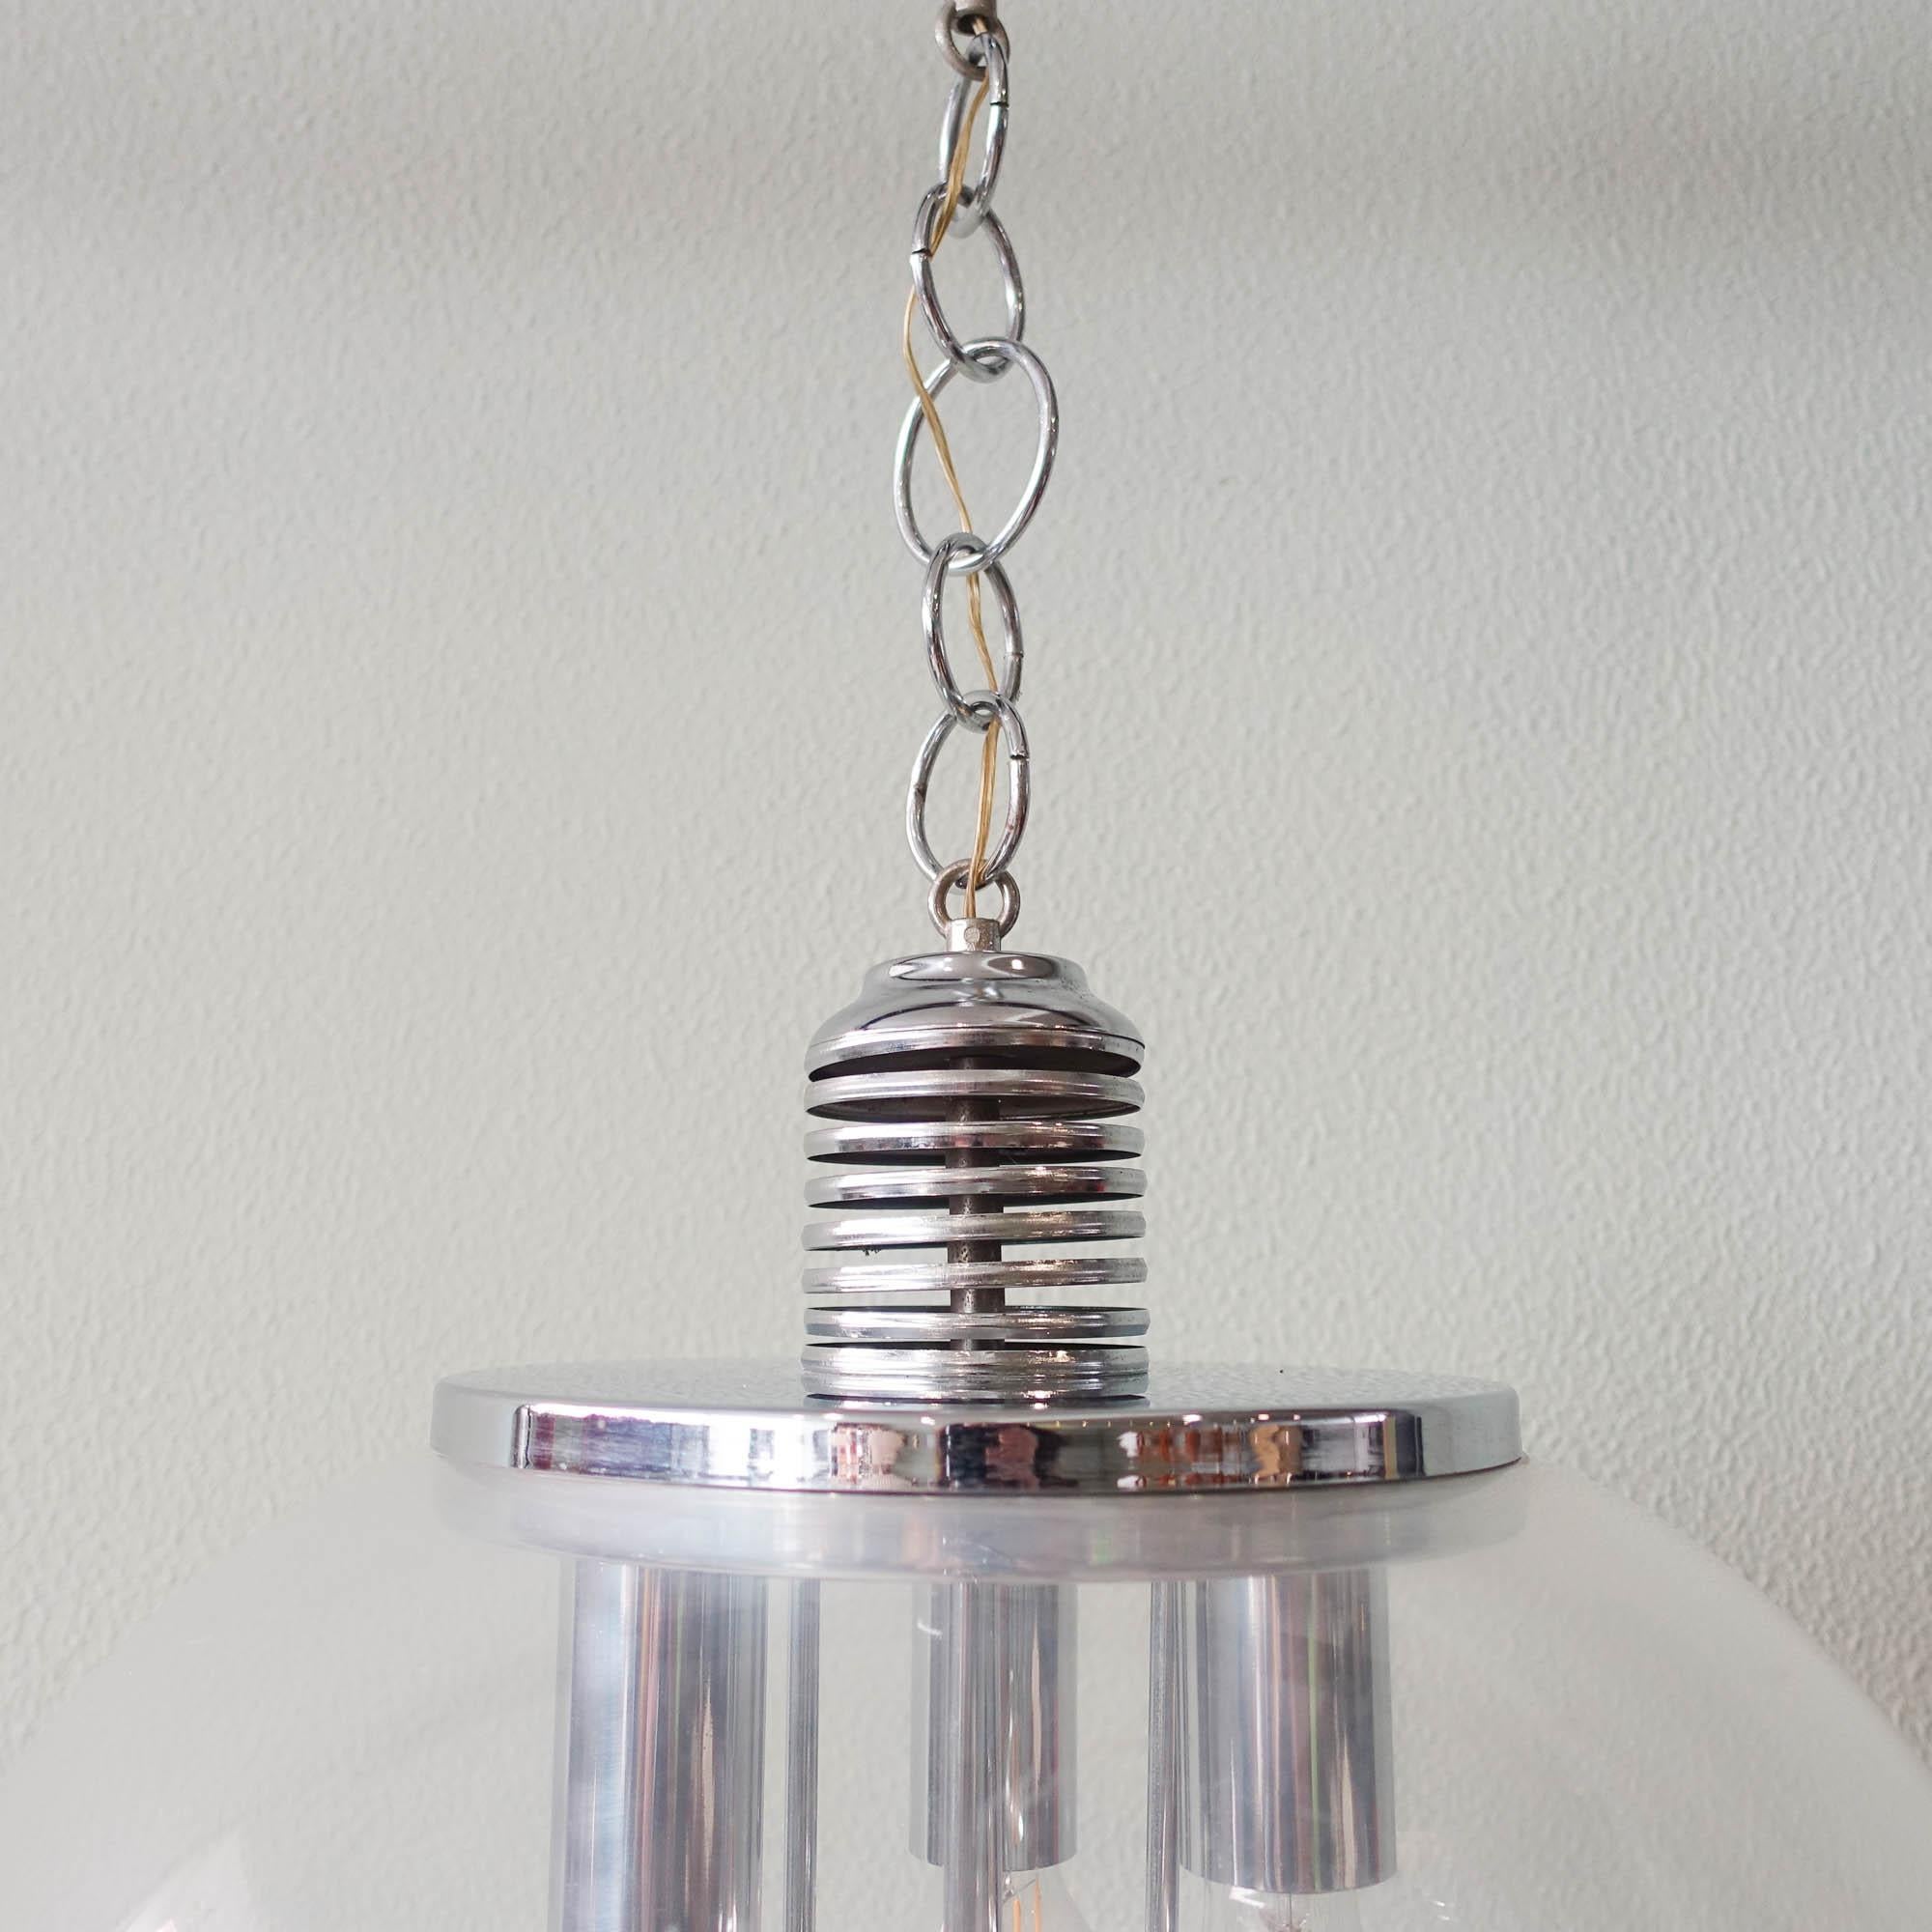 This pendant lamp was designed and produced in Germany during the 1970's. The half-globe is made of a transparent acrylic and inside a chromed metal part with 3 chrome plated E27 fittings on the inside as well as 4 chromed balls in different sizes.